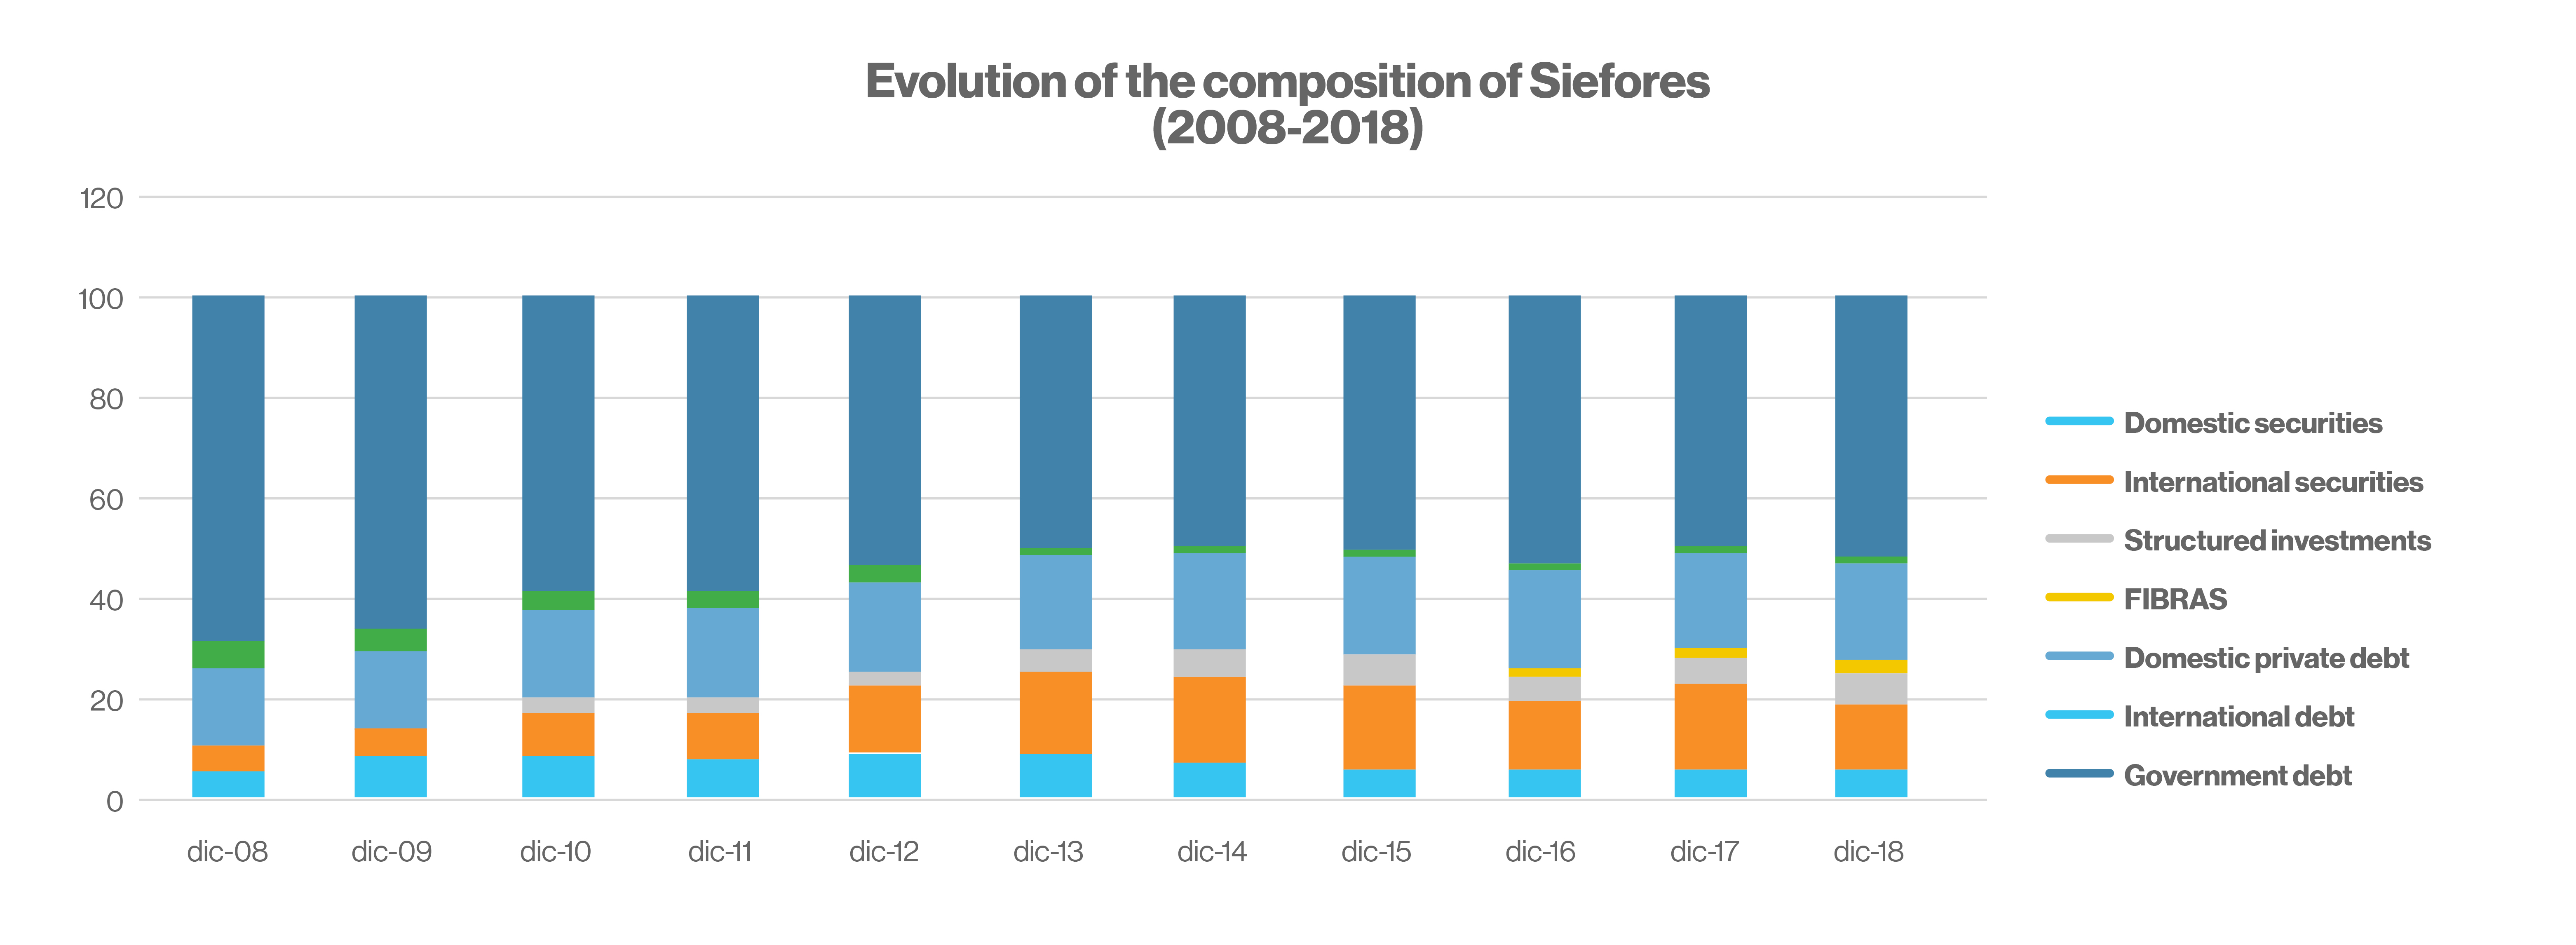 Evolution of Siefores composition (2008-2018)